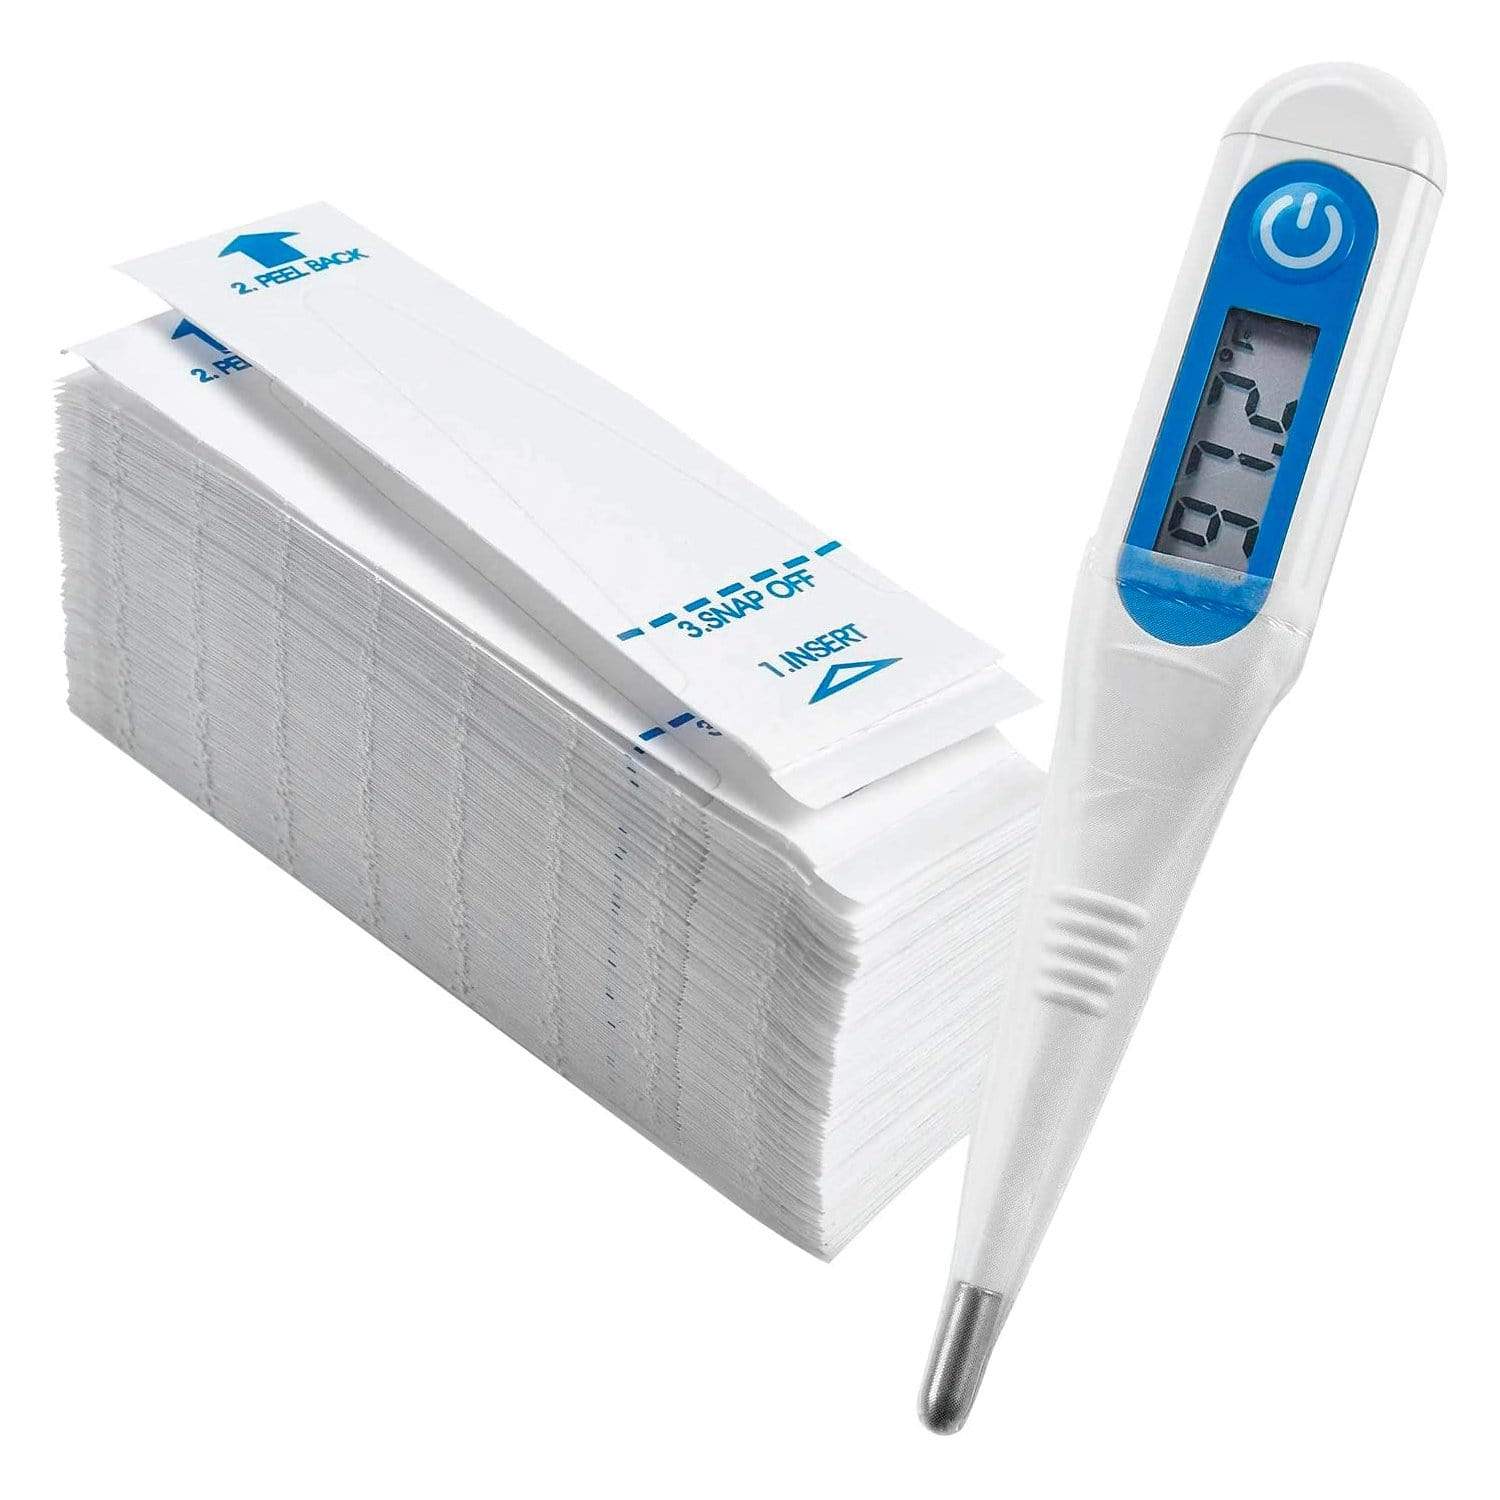 Disposable Covers DT-01B Digital Thermometer